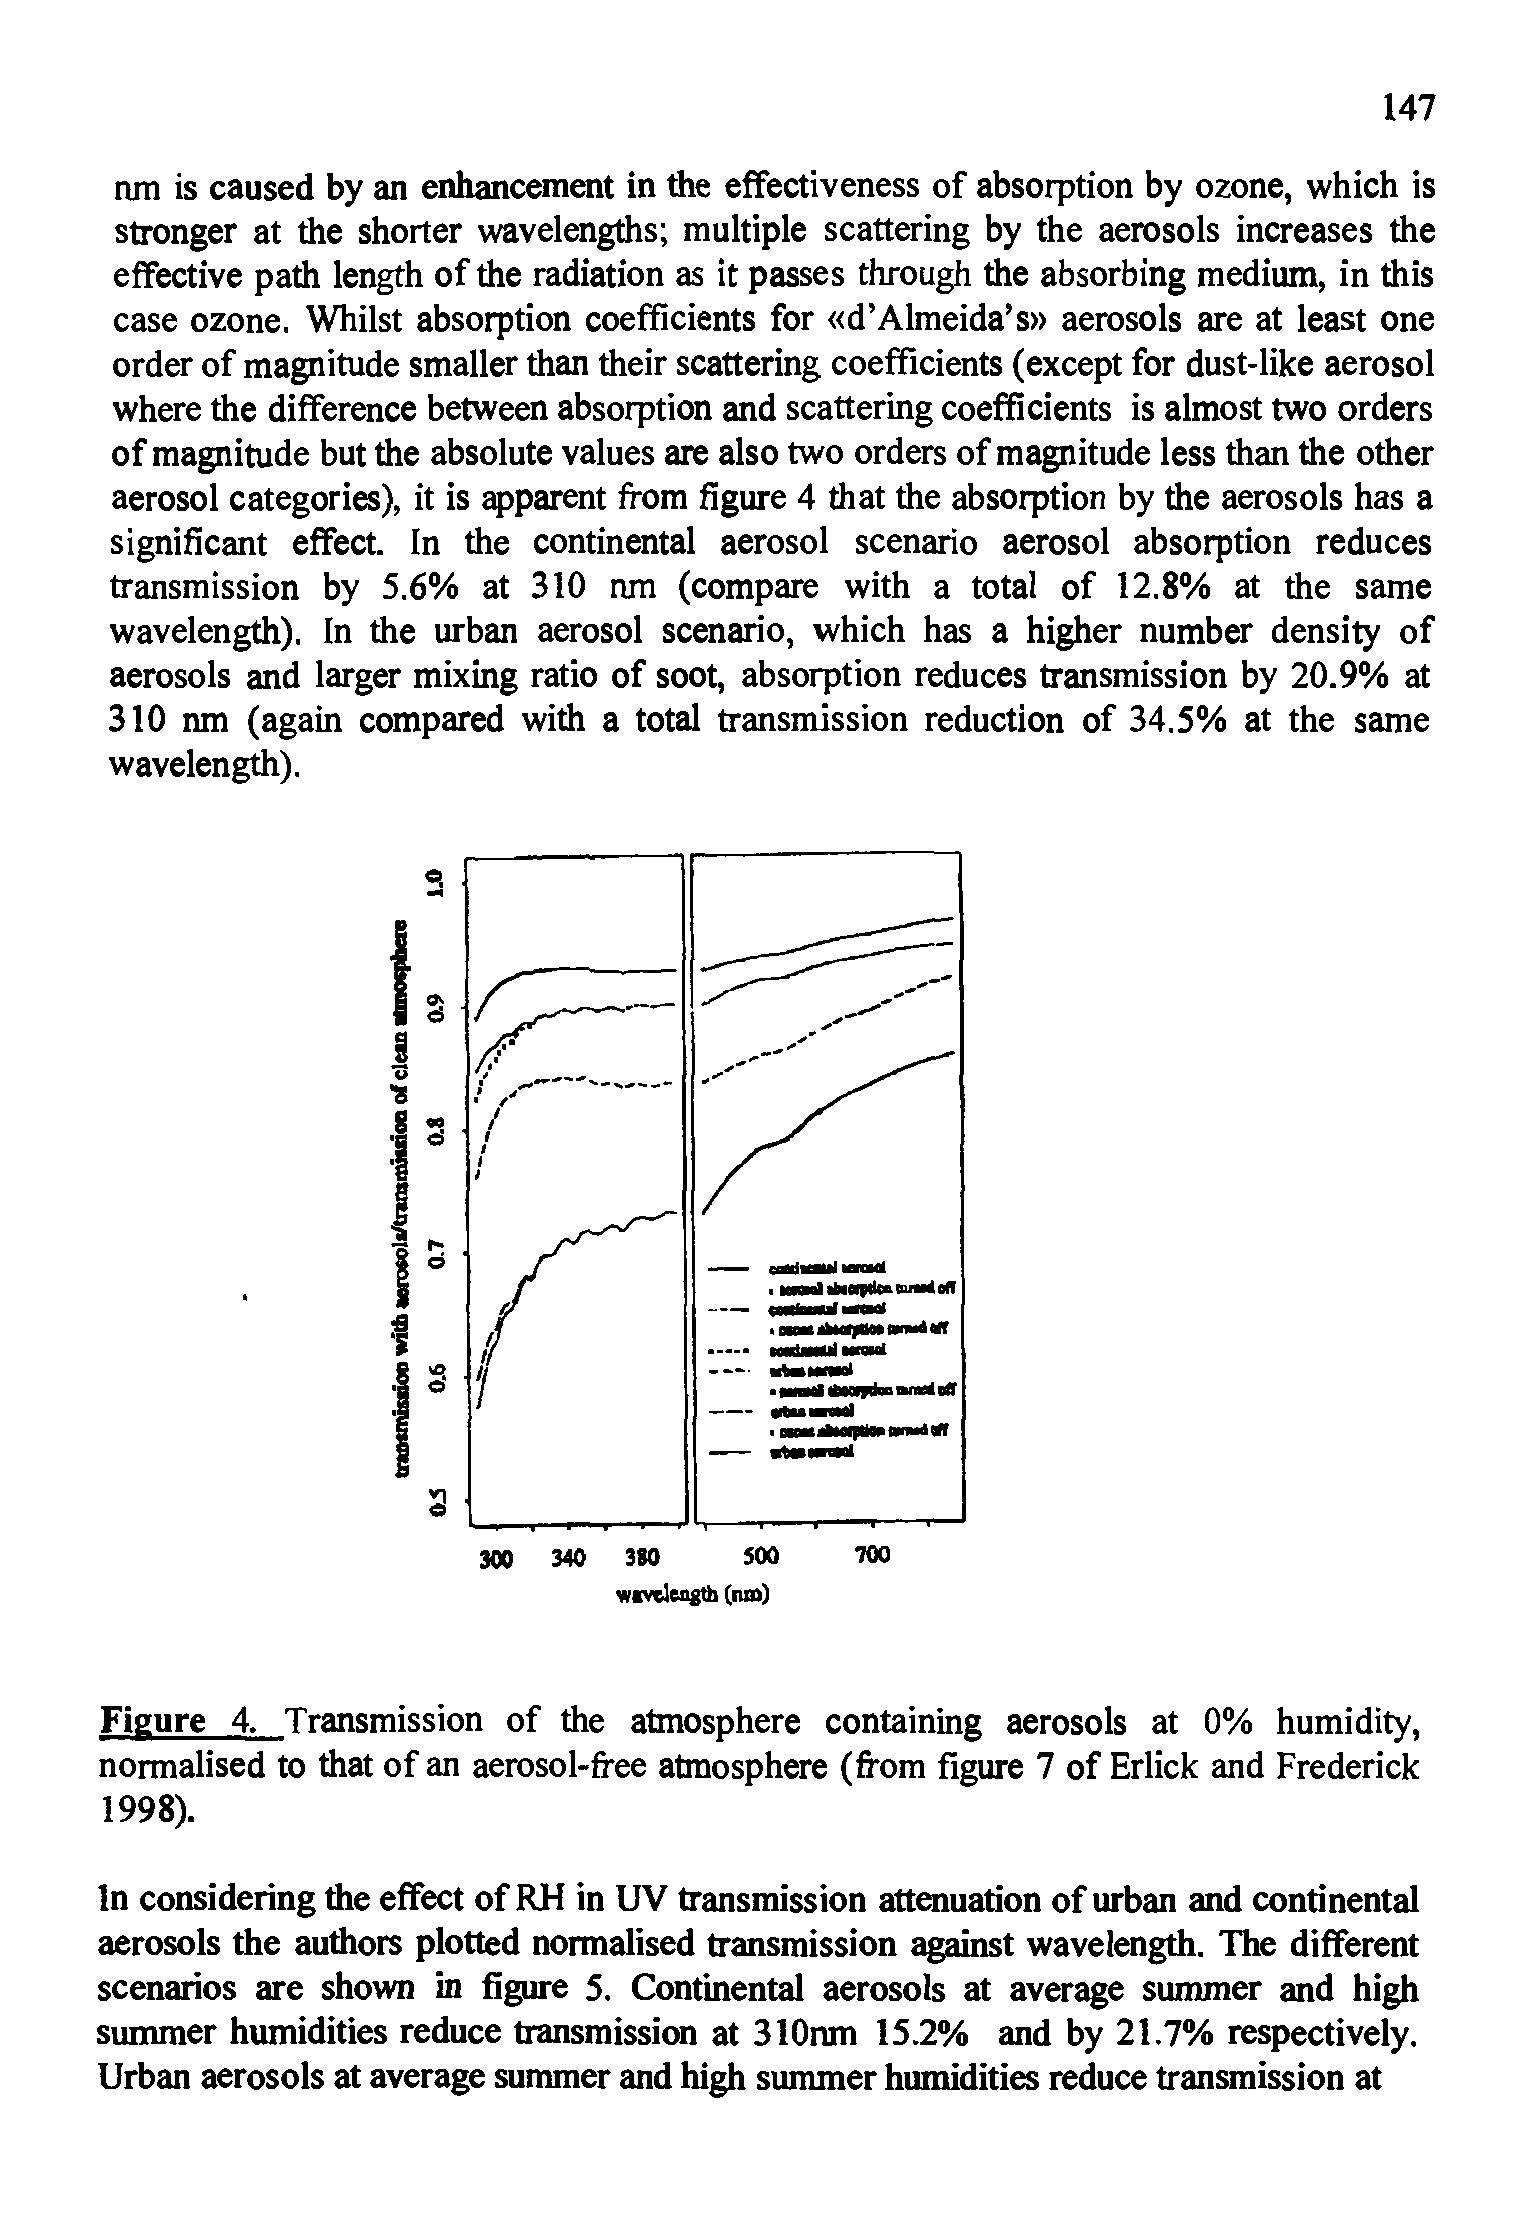 Figure 4. Transmission of the atmosphere containing aerosols at 0% humidity, normalised to that of an aerosol-free atmosphere (from figure 7 of Erlick and Frederick 1998).